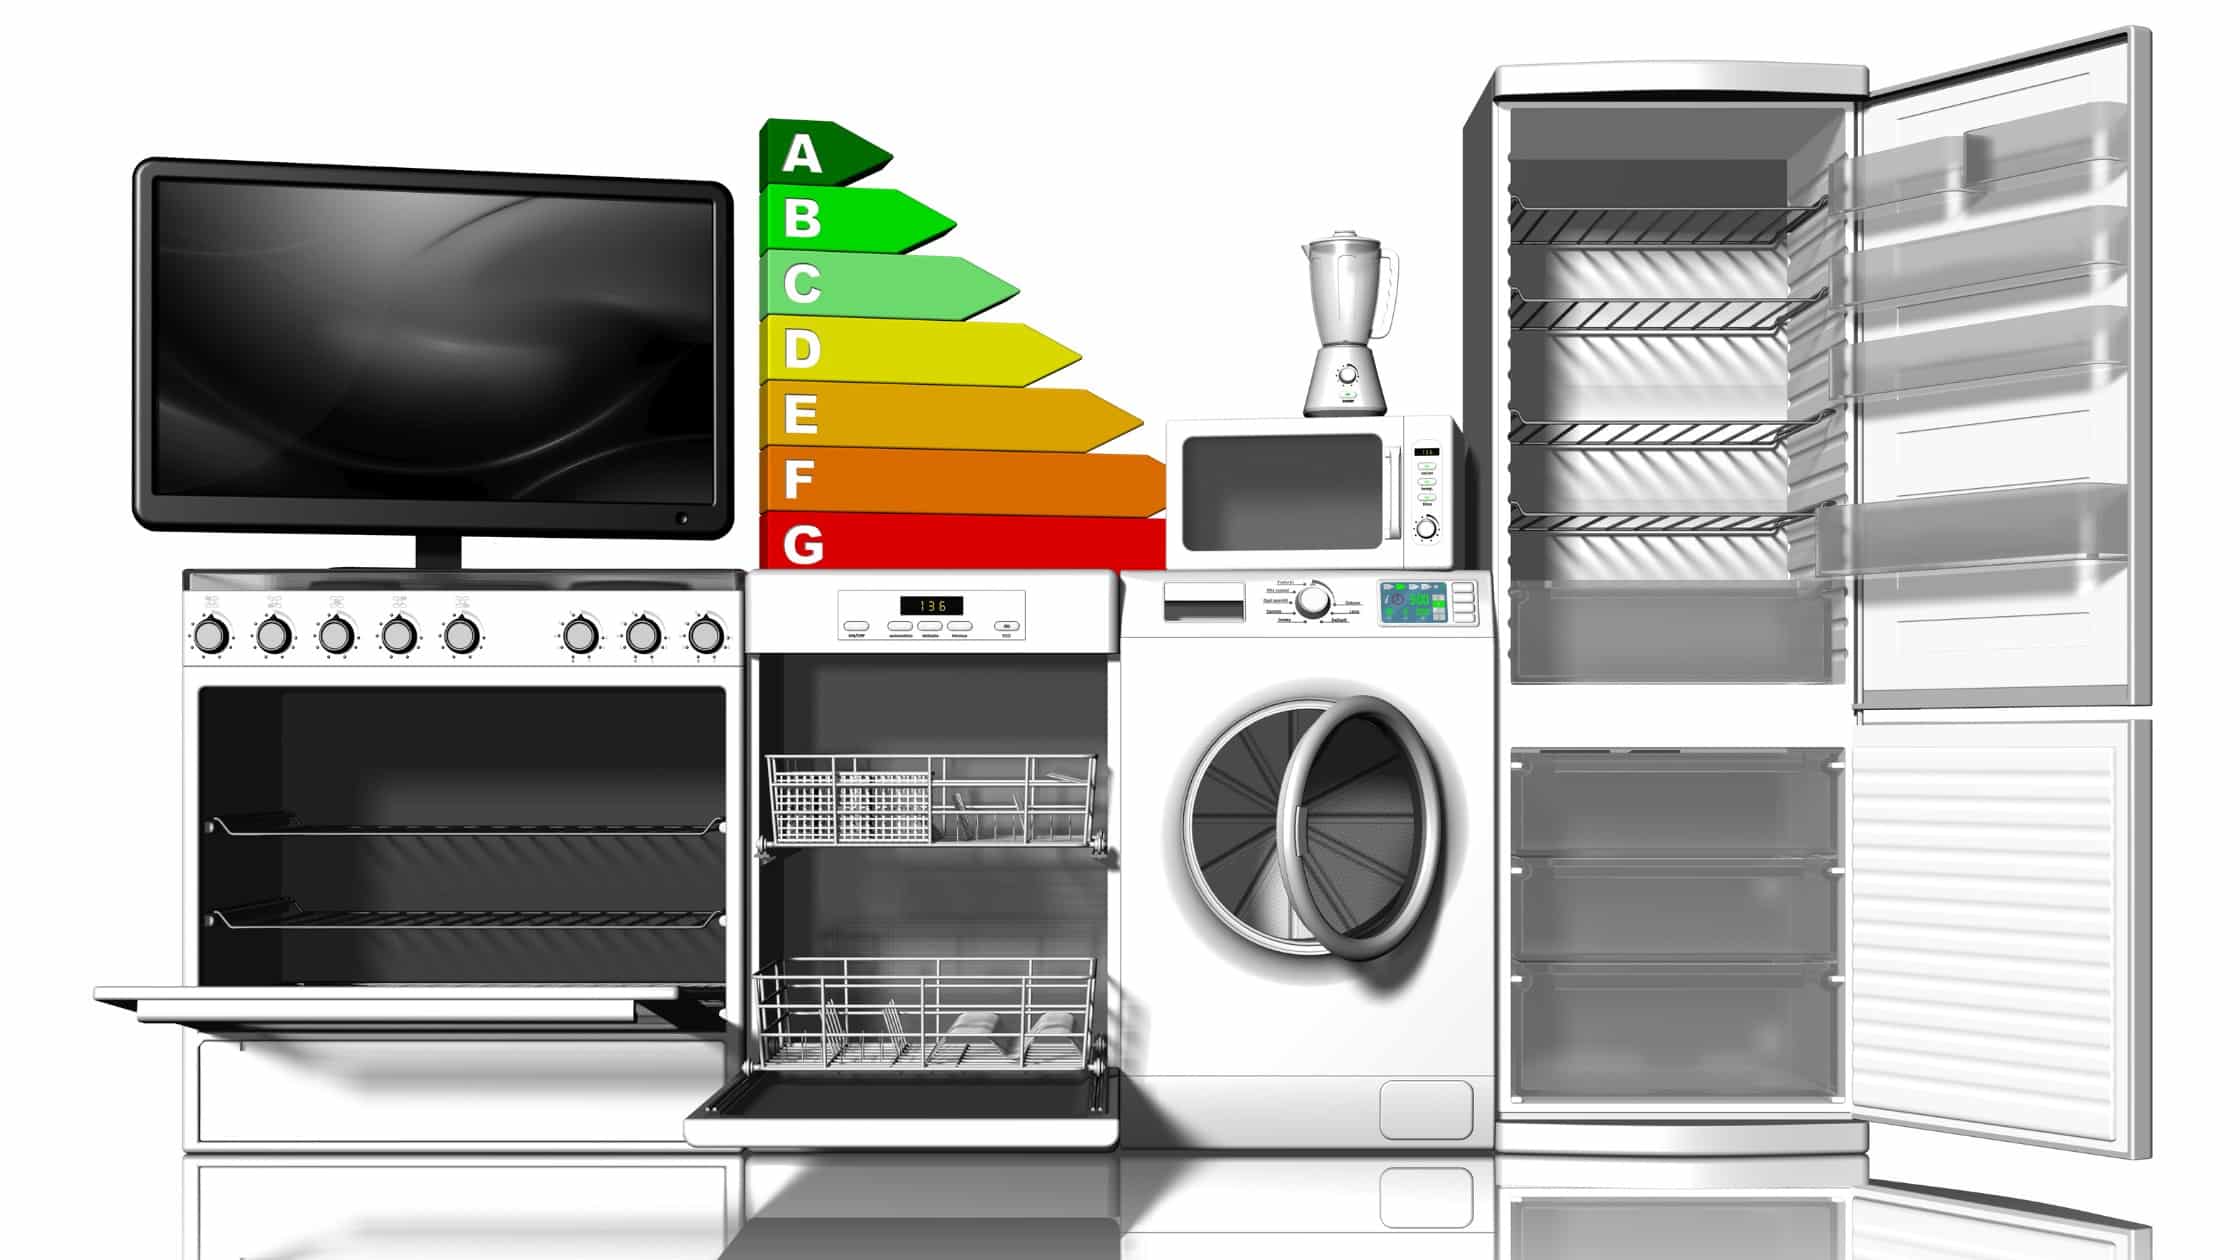 Upgrade to more efficient appliances and save big at appliances 4 less - flint